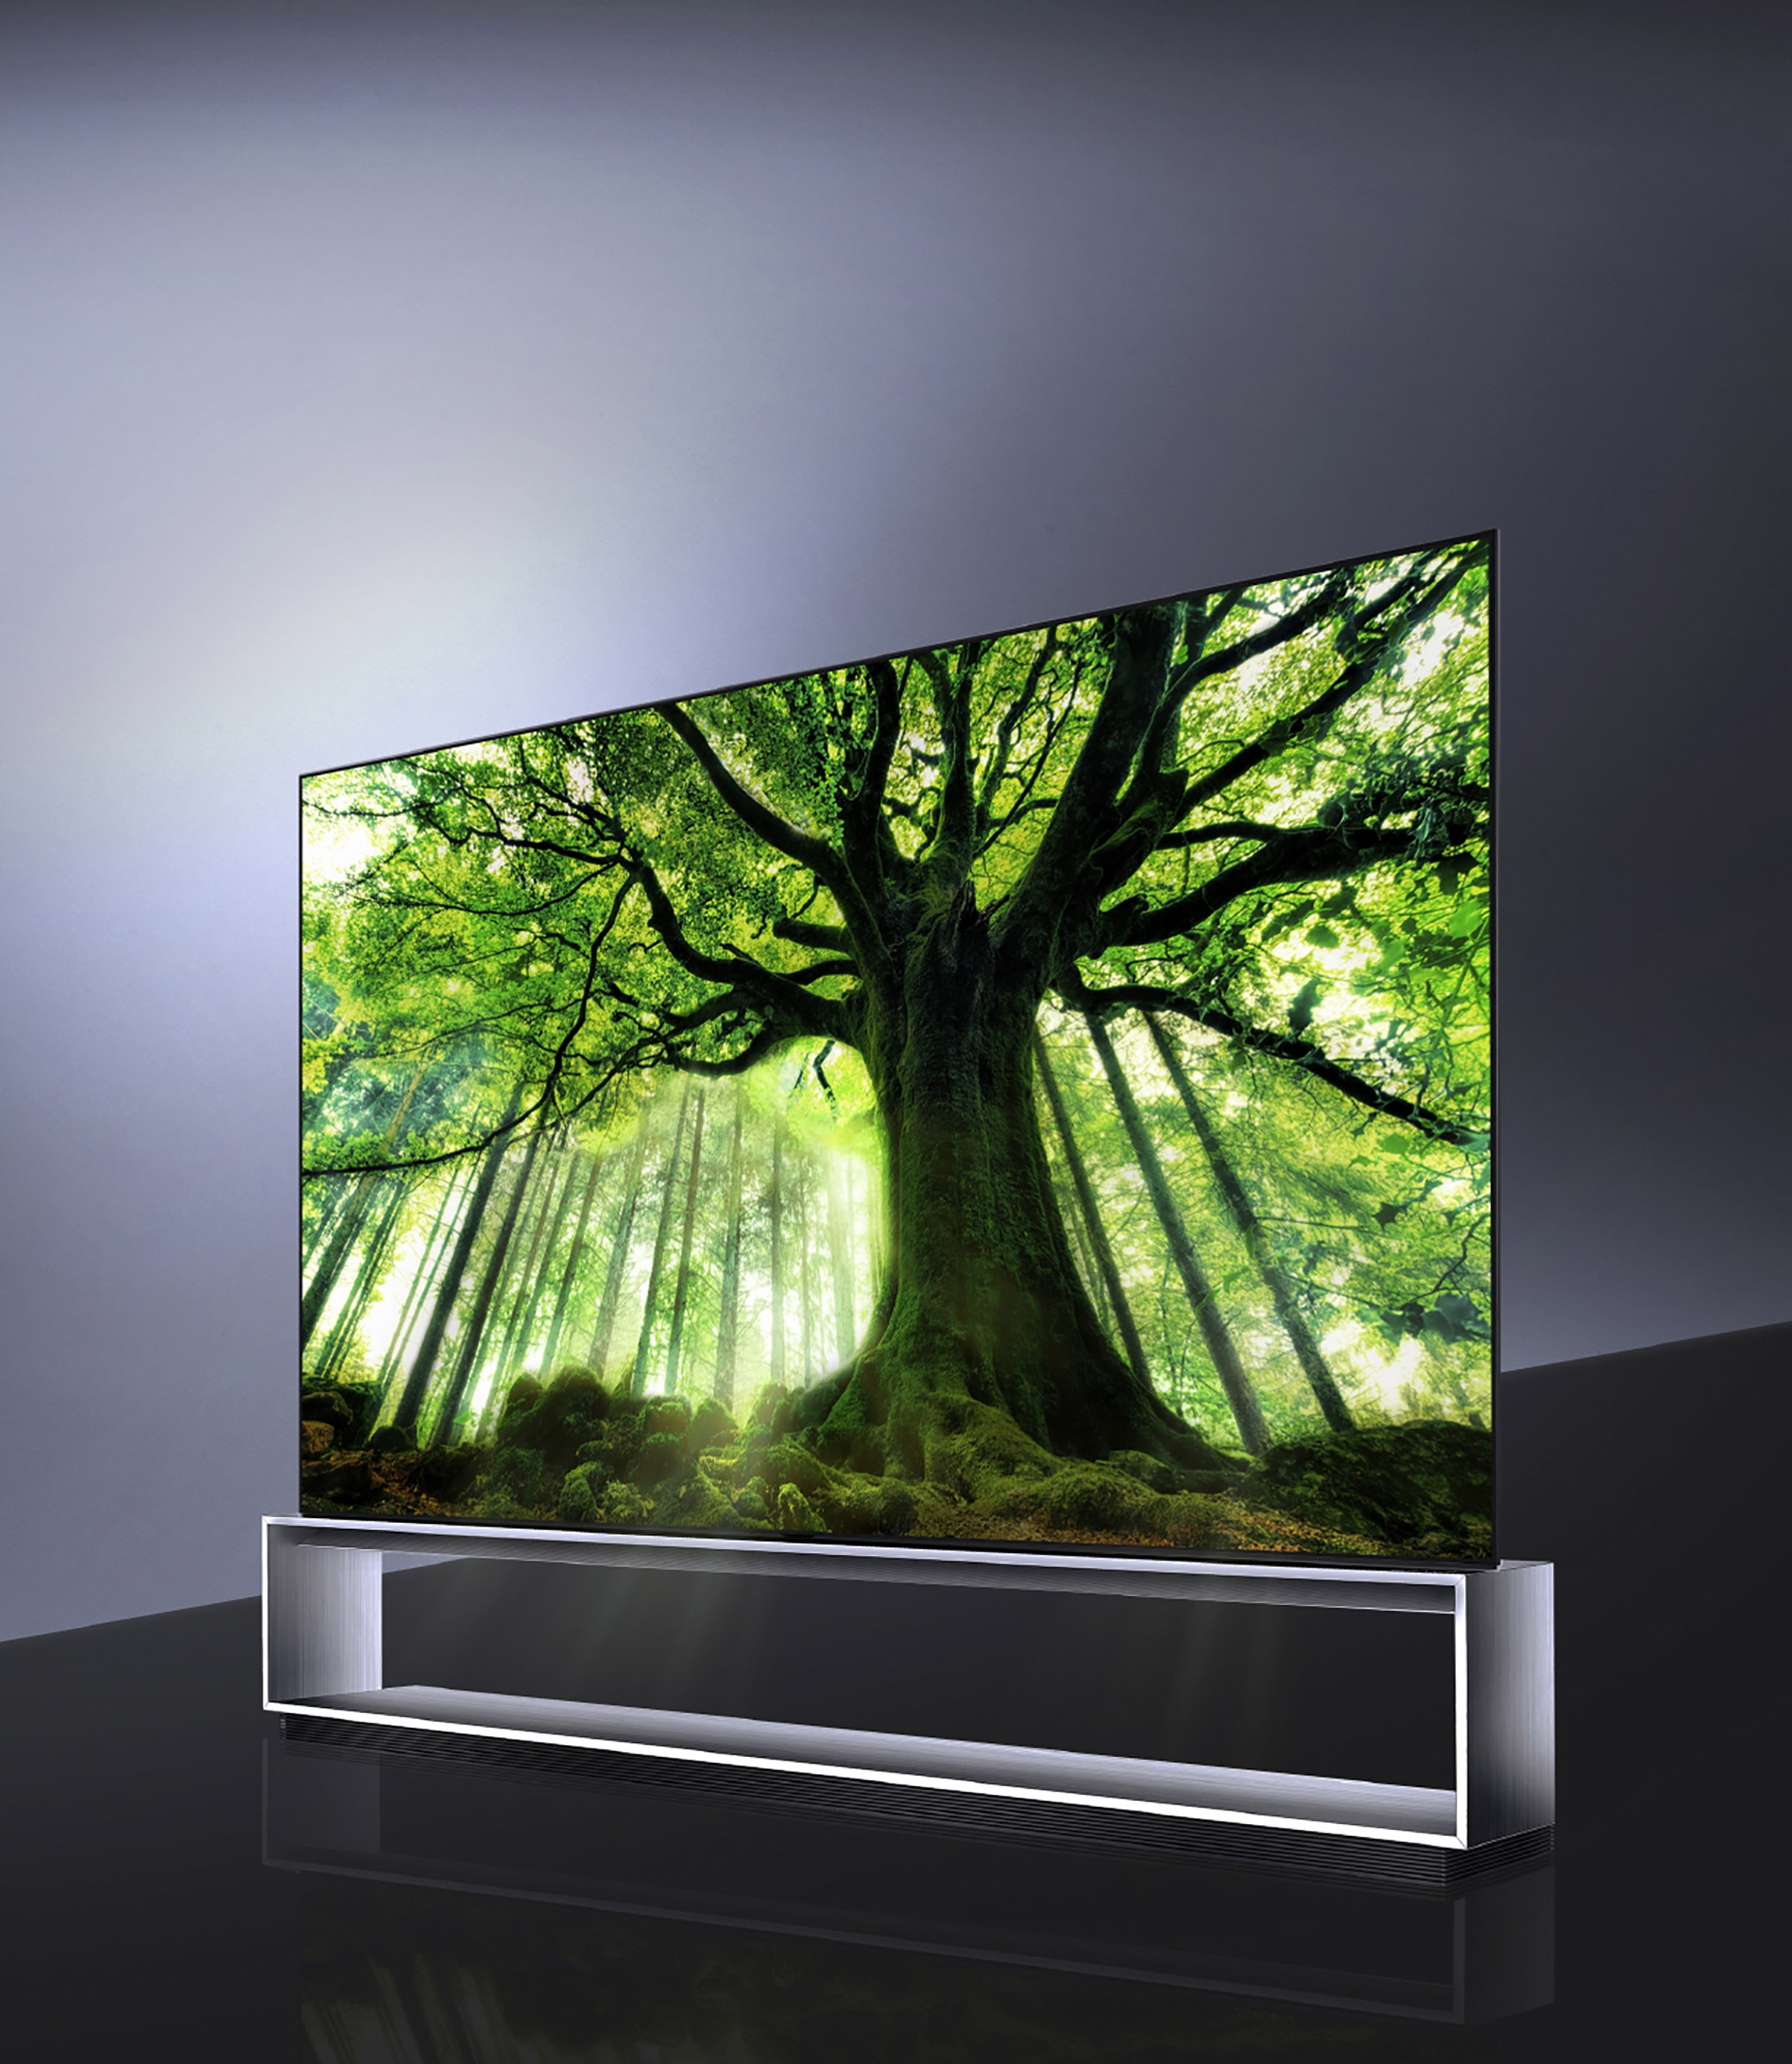 LG 88-inch OLED 8K TV: Best Inventions 2019